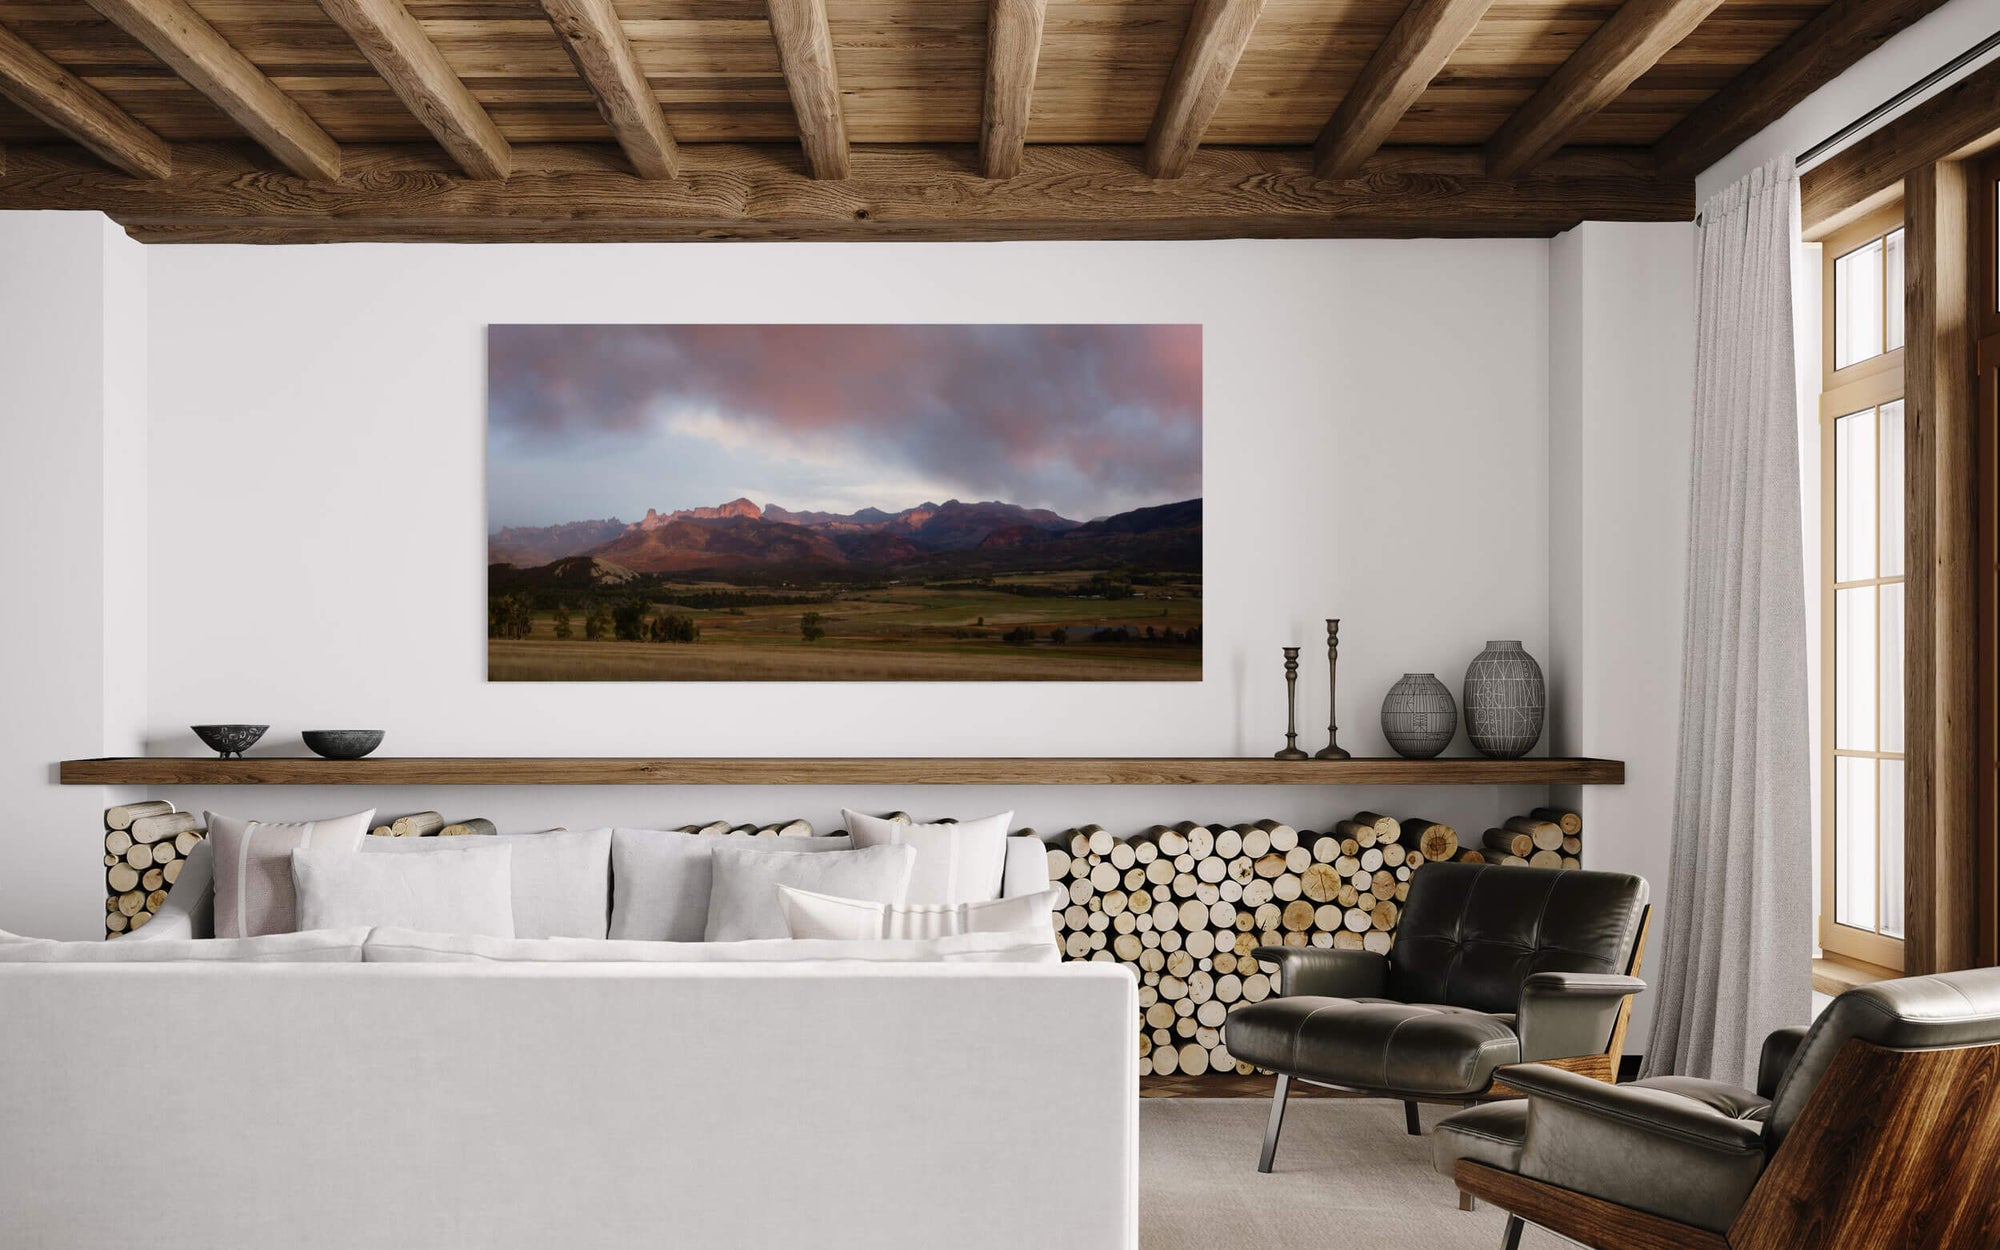 An Owl Creek Pass picture at sunset in Ridgway, Colorado, hangs in a living room.